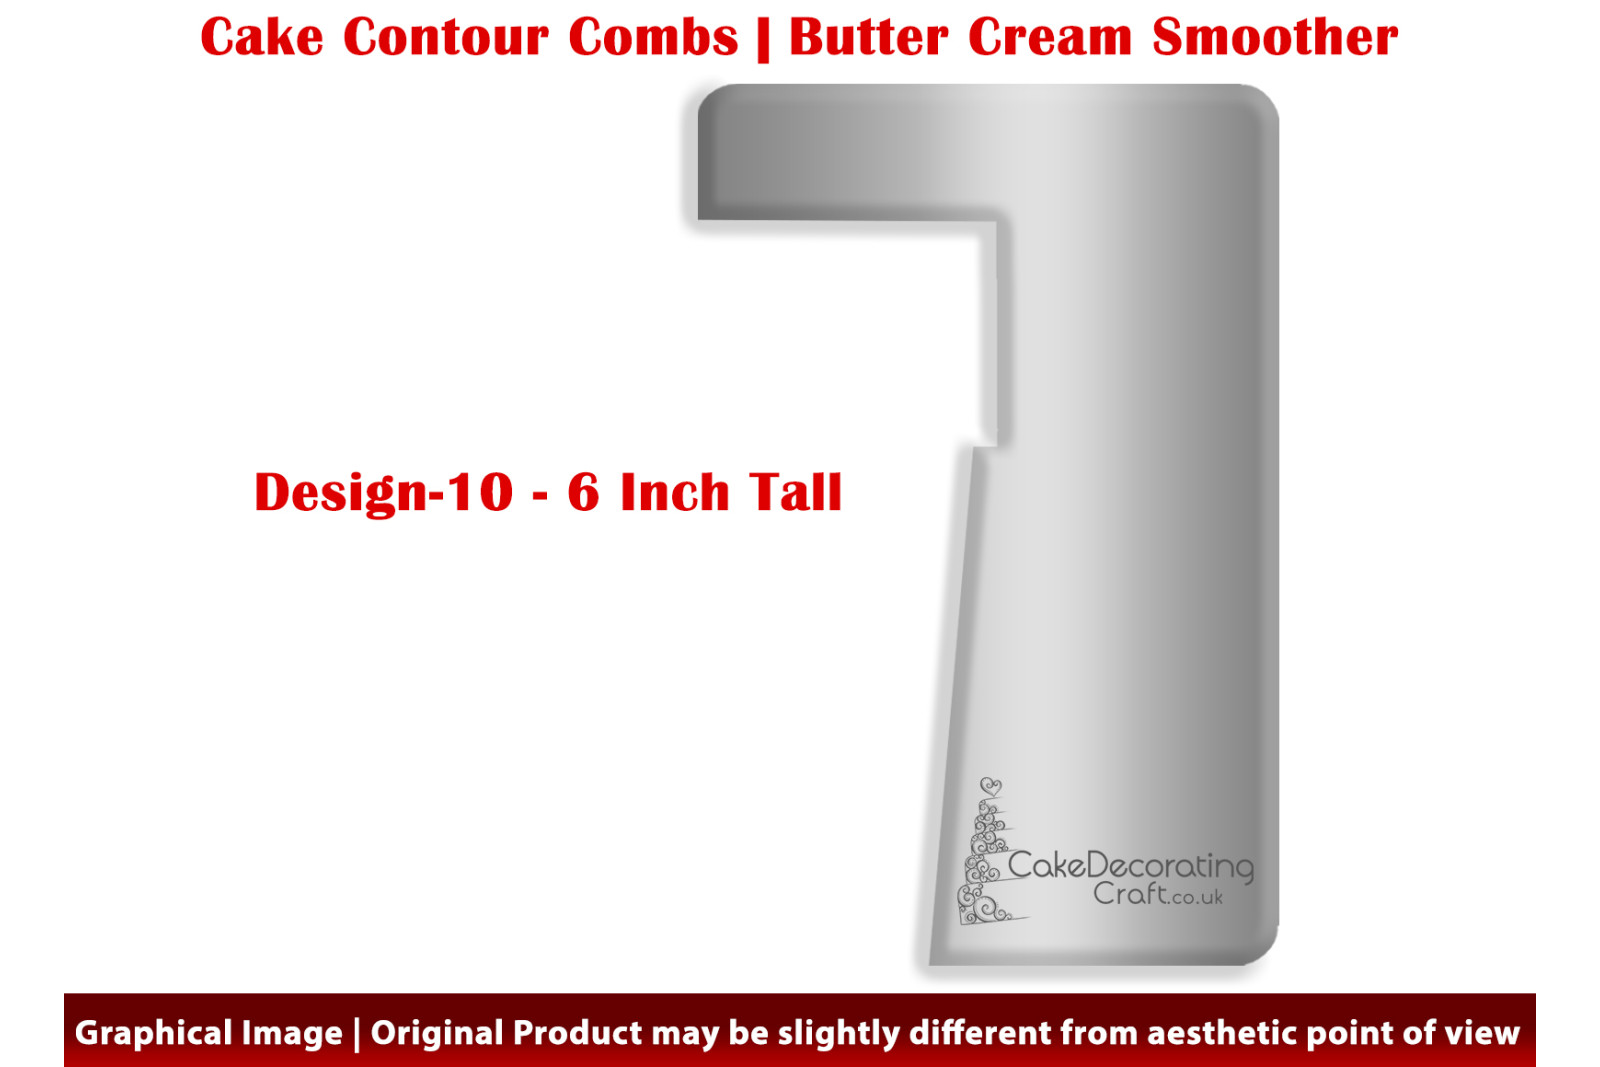 Flower Pot | 6 Inch | Cake Decorating Craft | Cake Contour Combs | Smoothing | Metal Spreader | Butter Cream Smoothing | Genius Tool